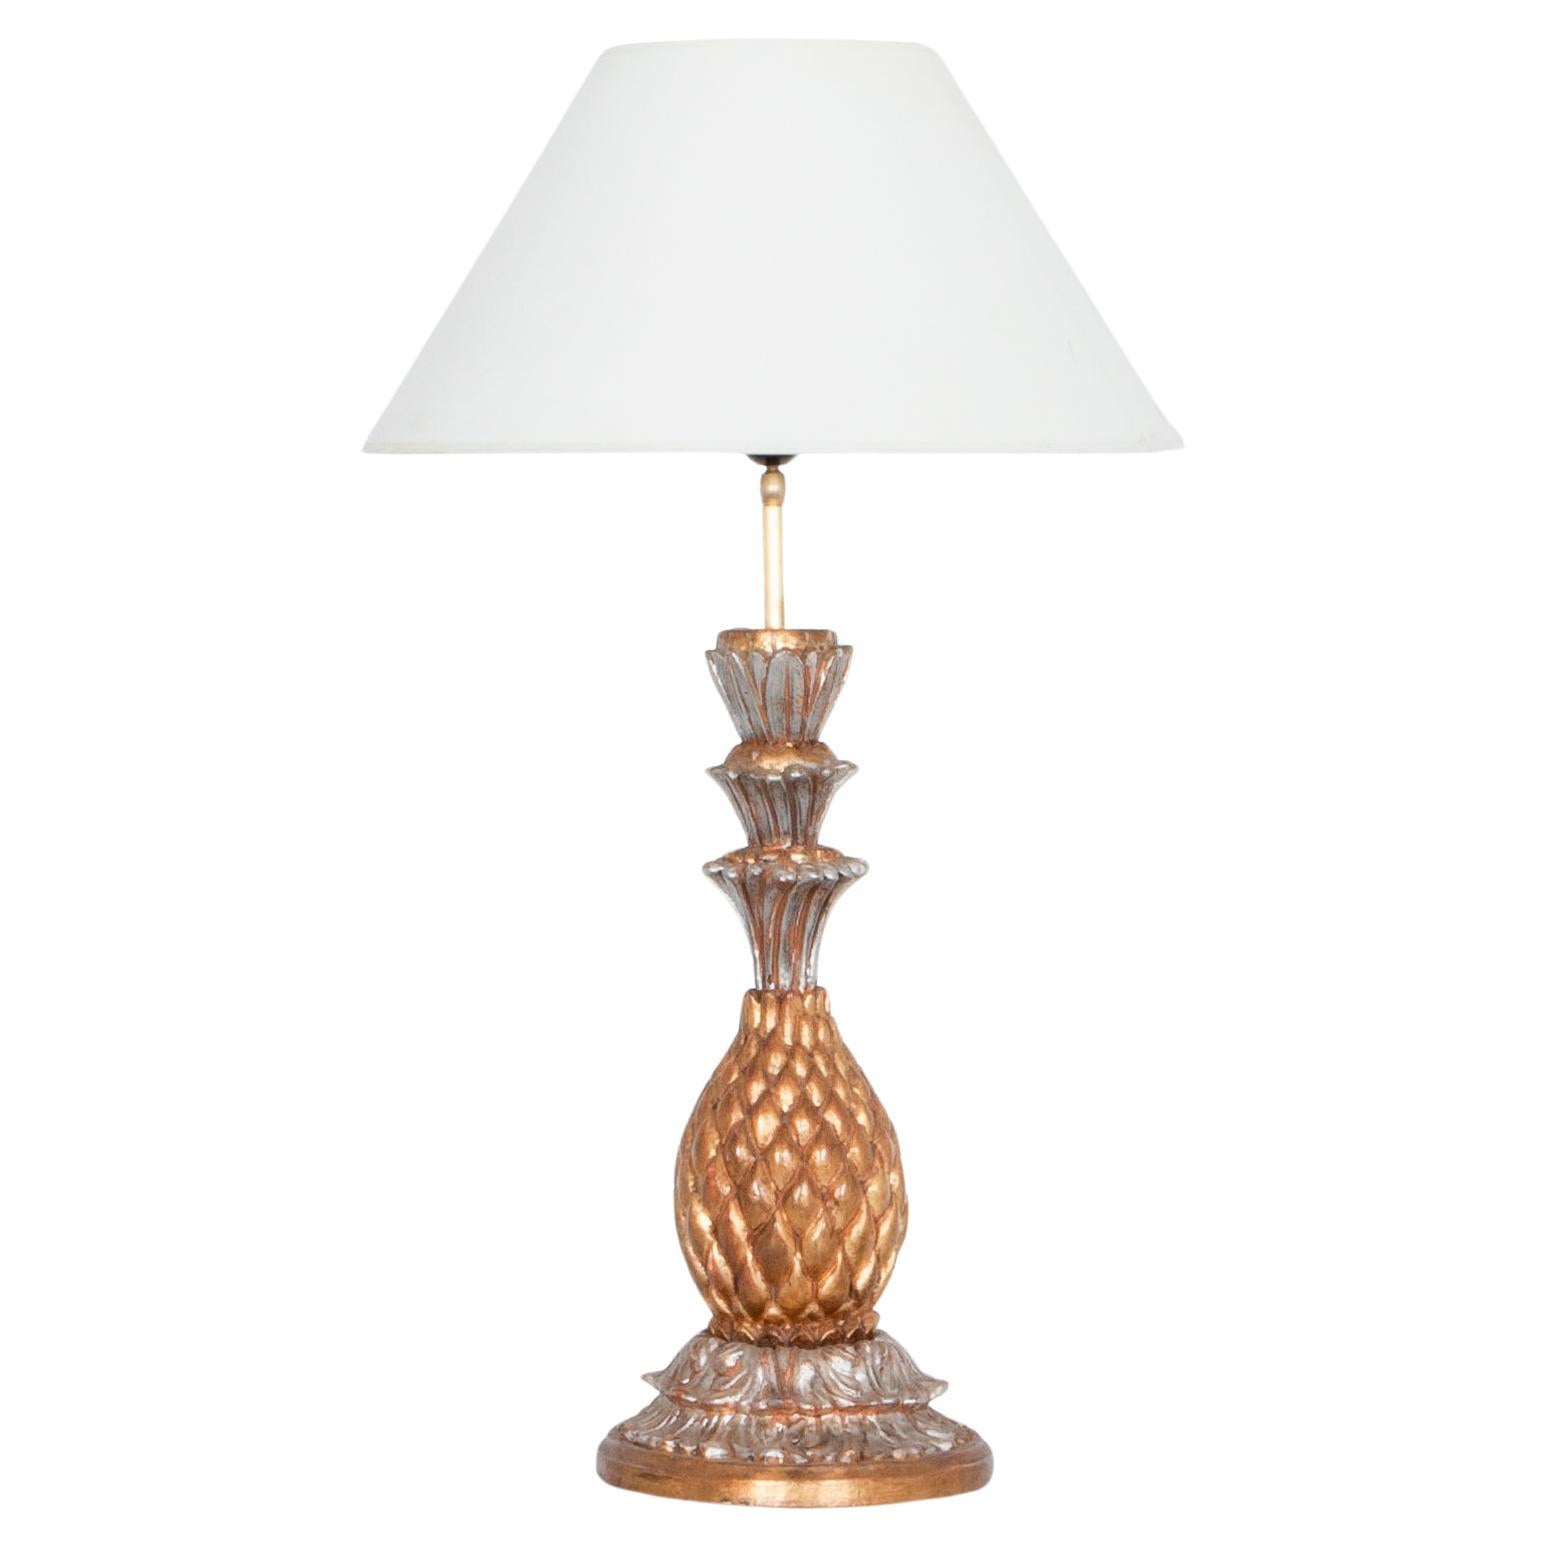 1970s French Pineapple Lamp